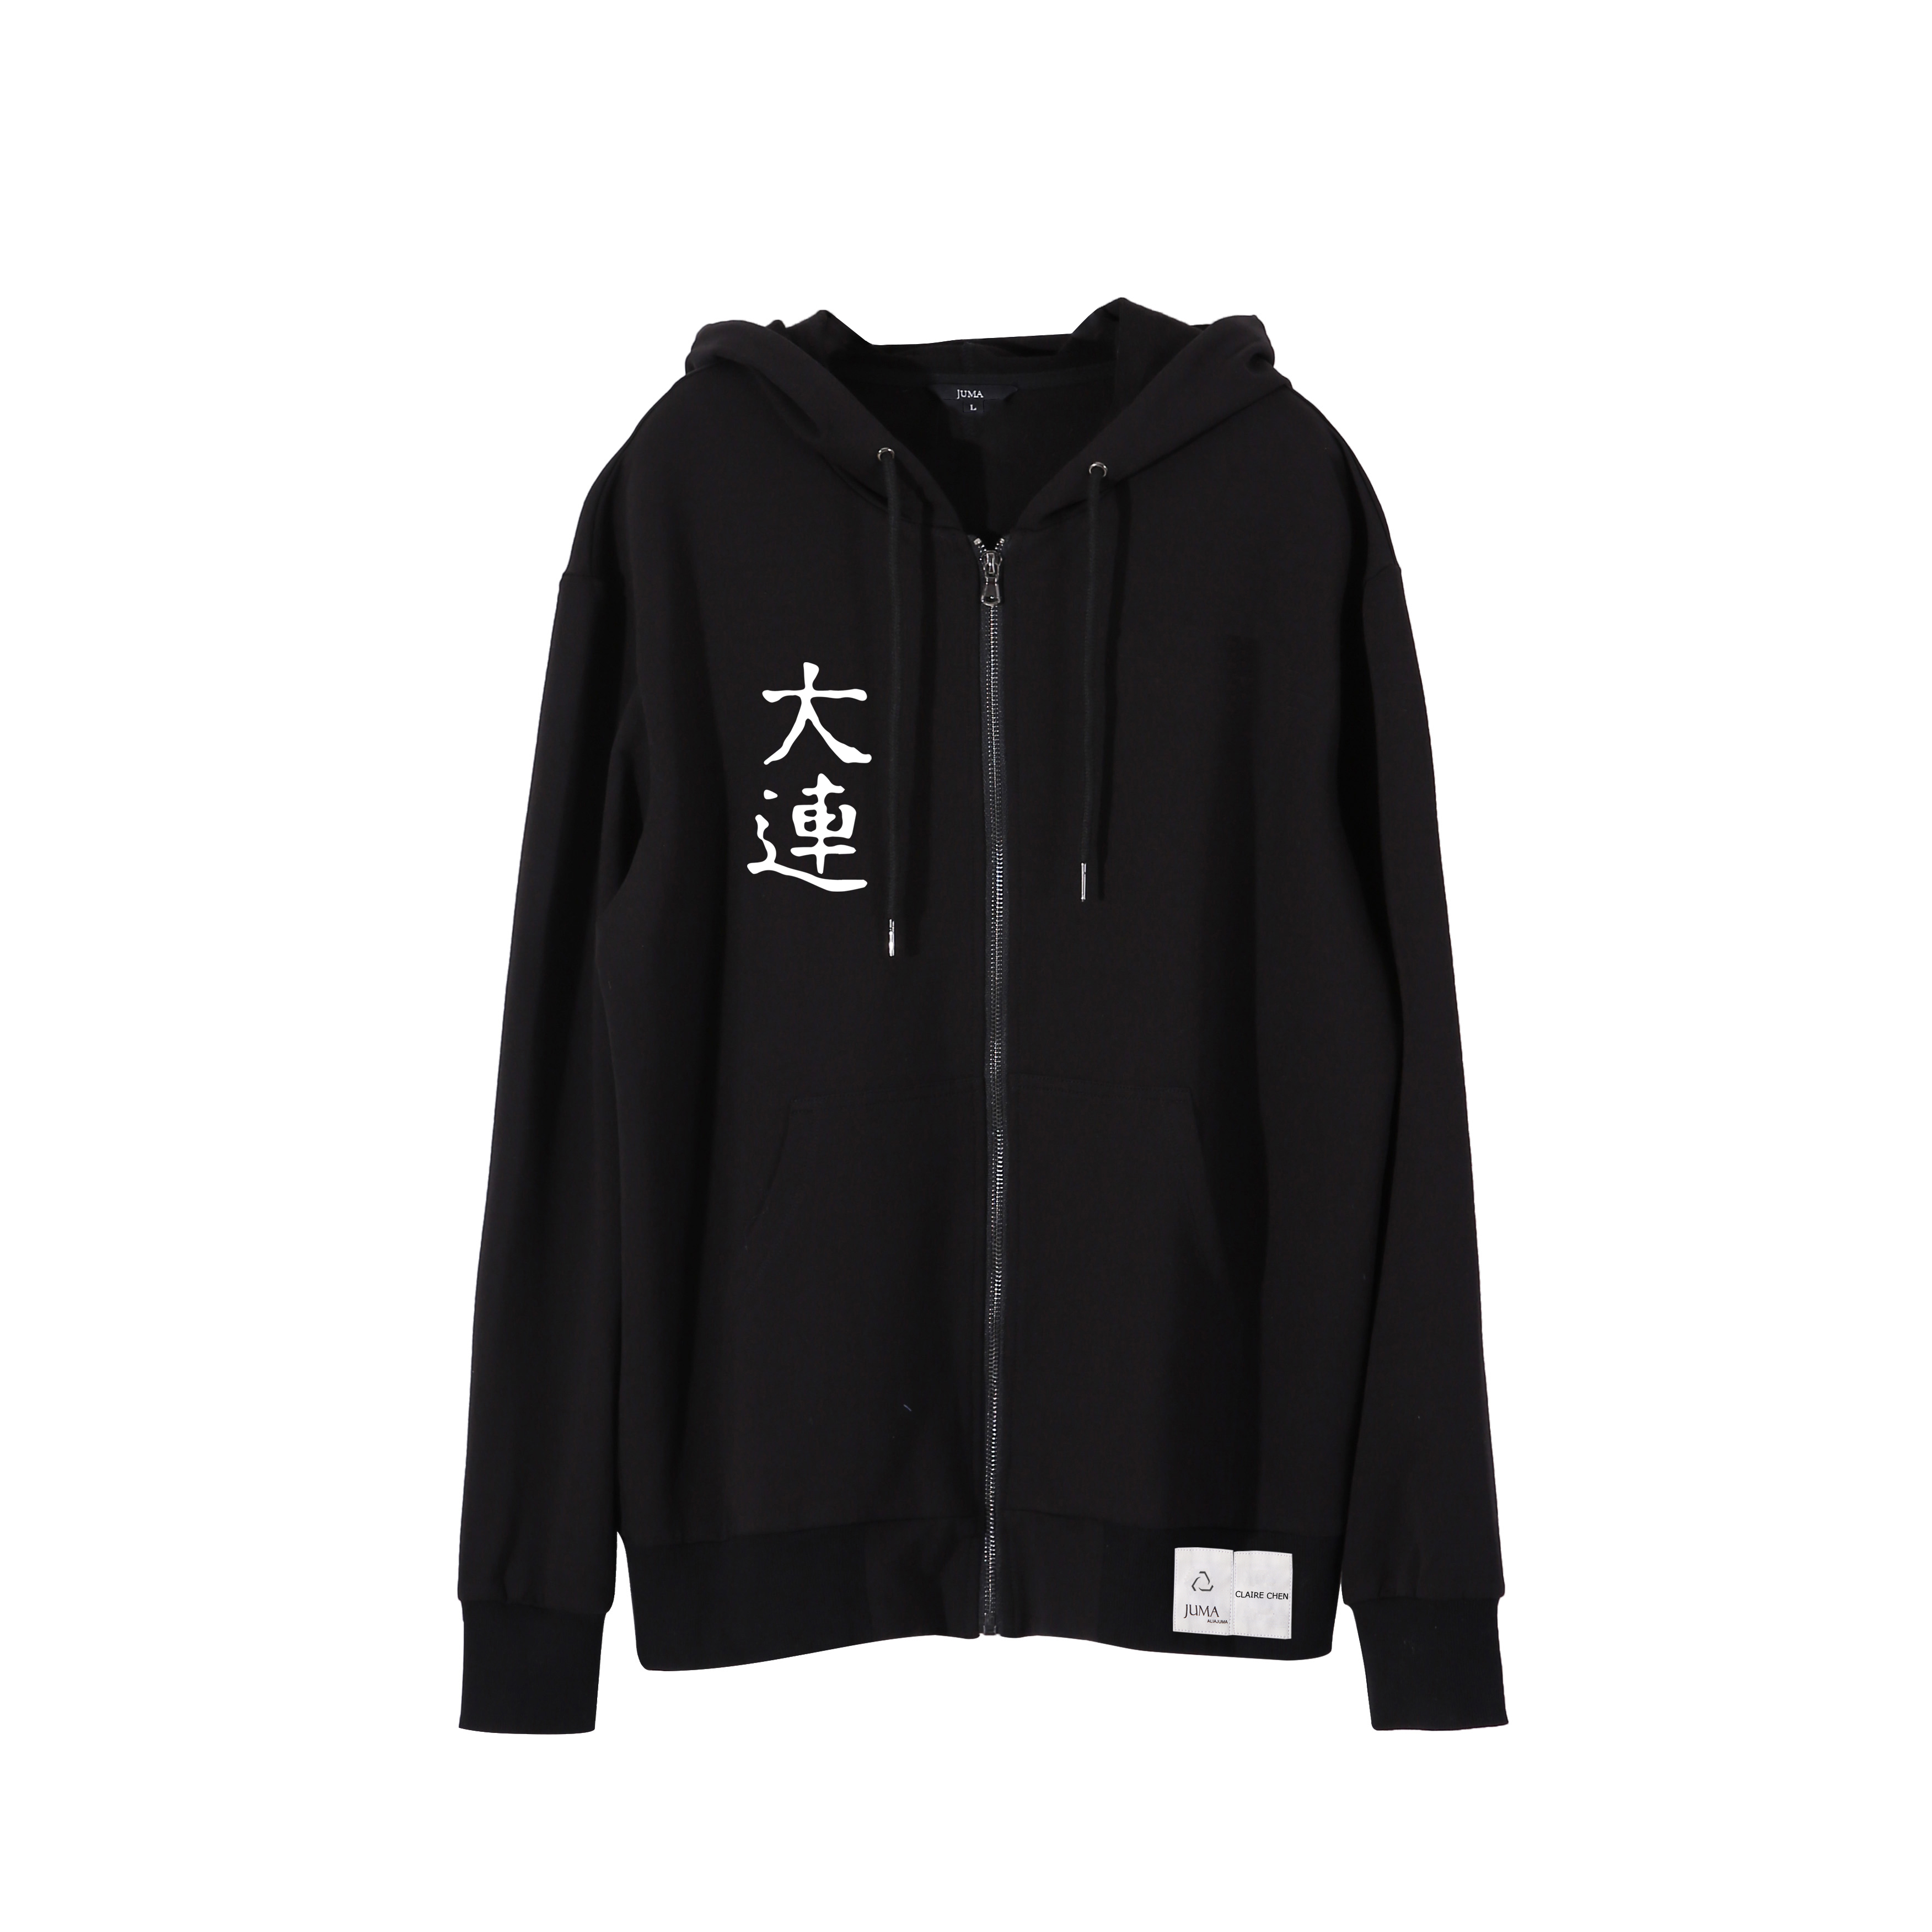 Claire Chen 连帽衫-8个再生水瓶-黑色｜Claire Chen Hoodie - 8 Recycled Water Bottles - Black